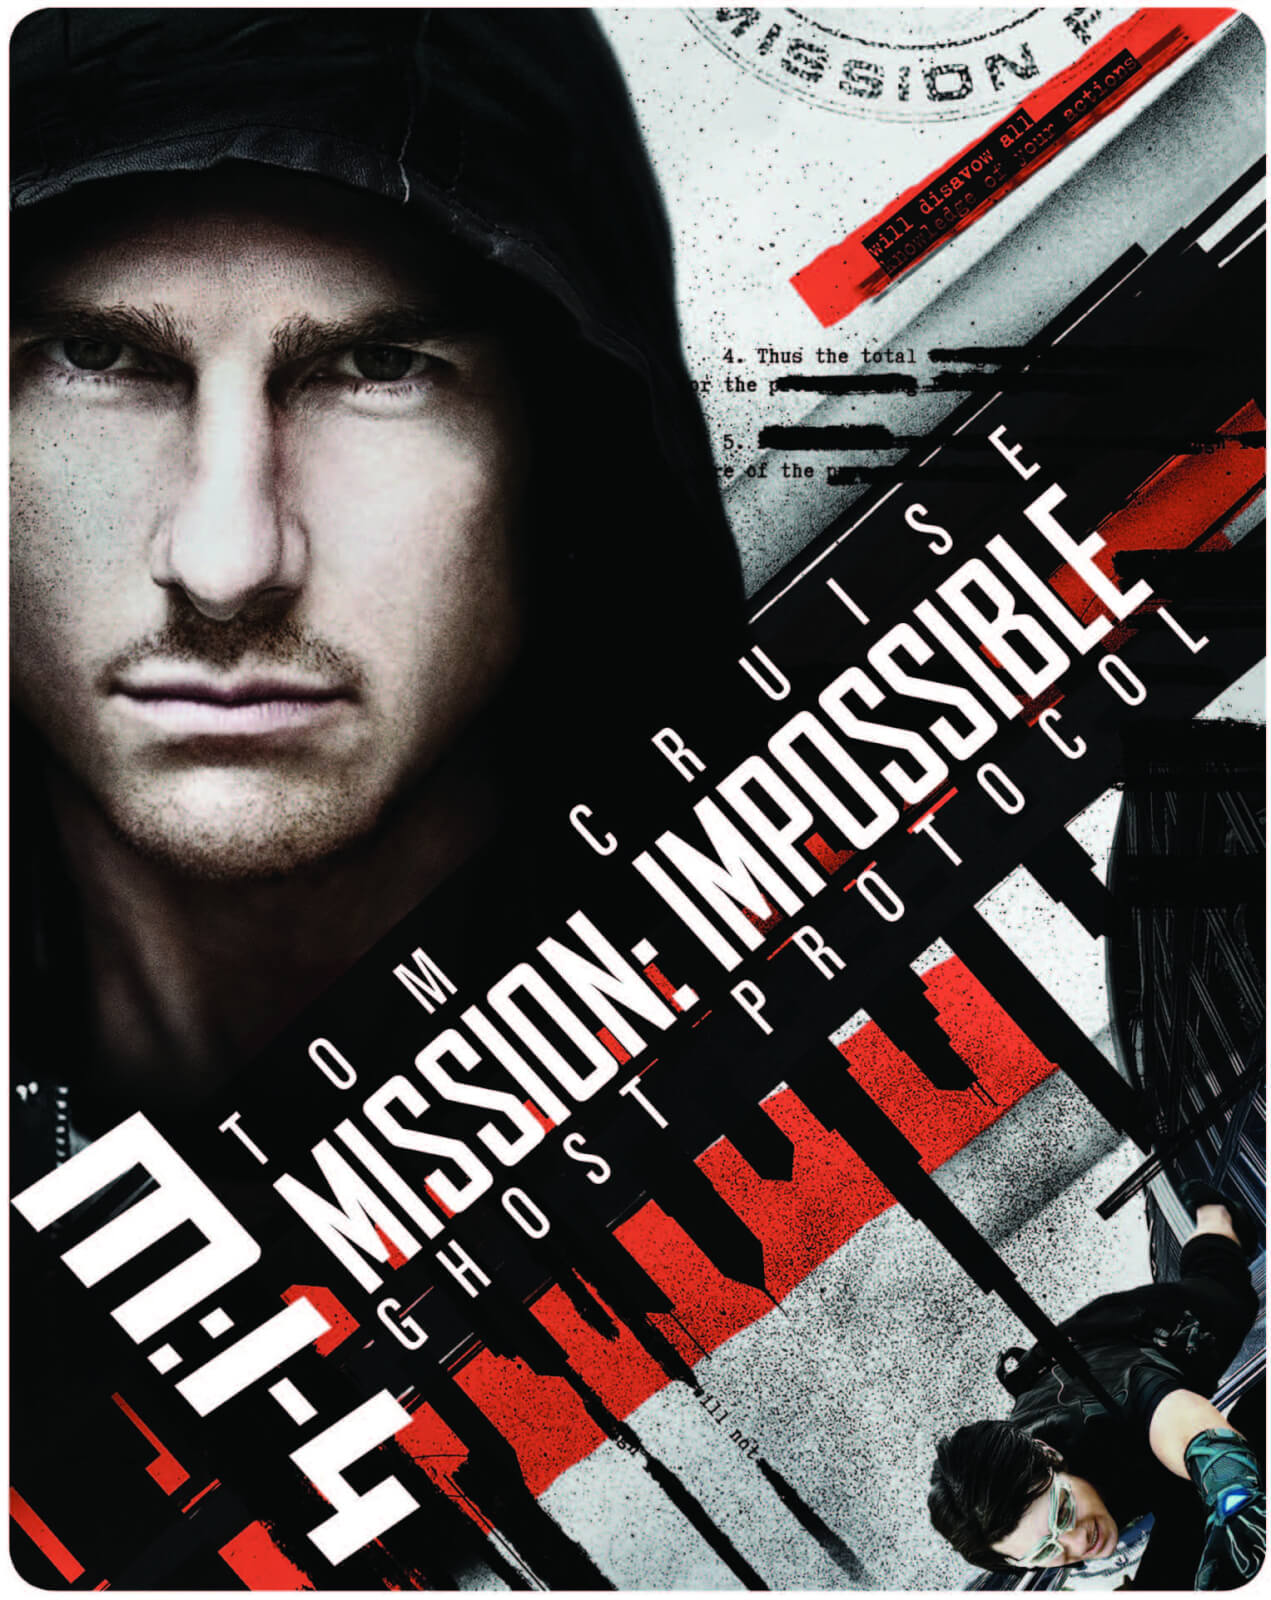 mission impossible ghost protocol 4k blu ray